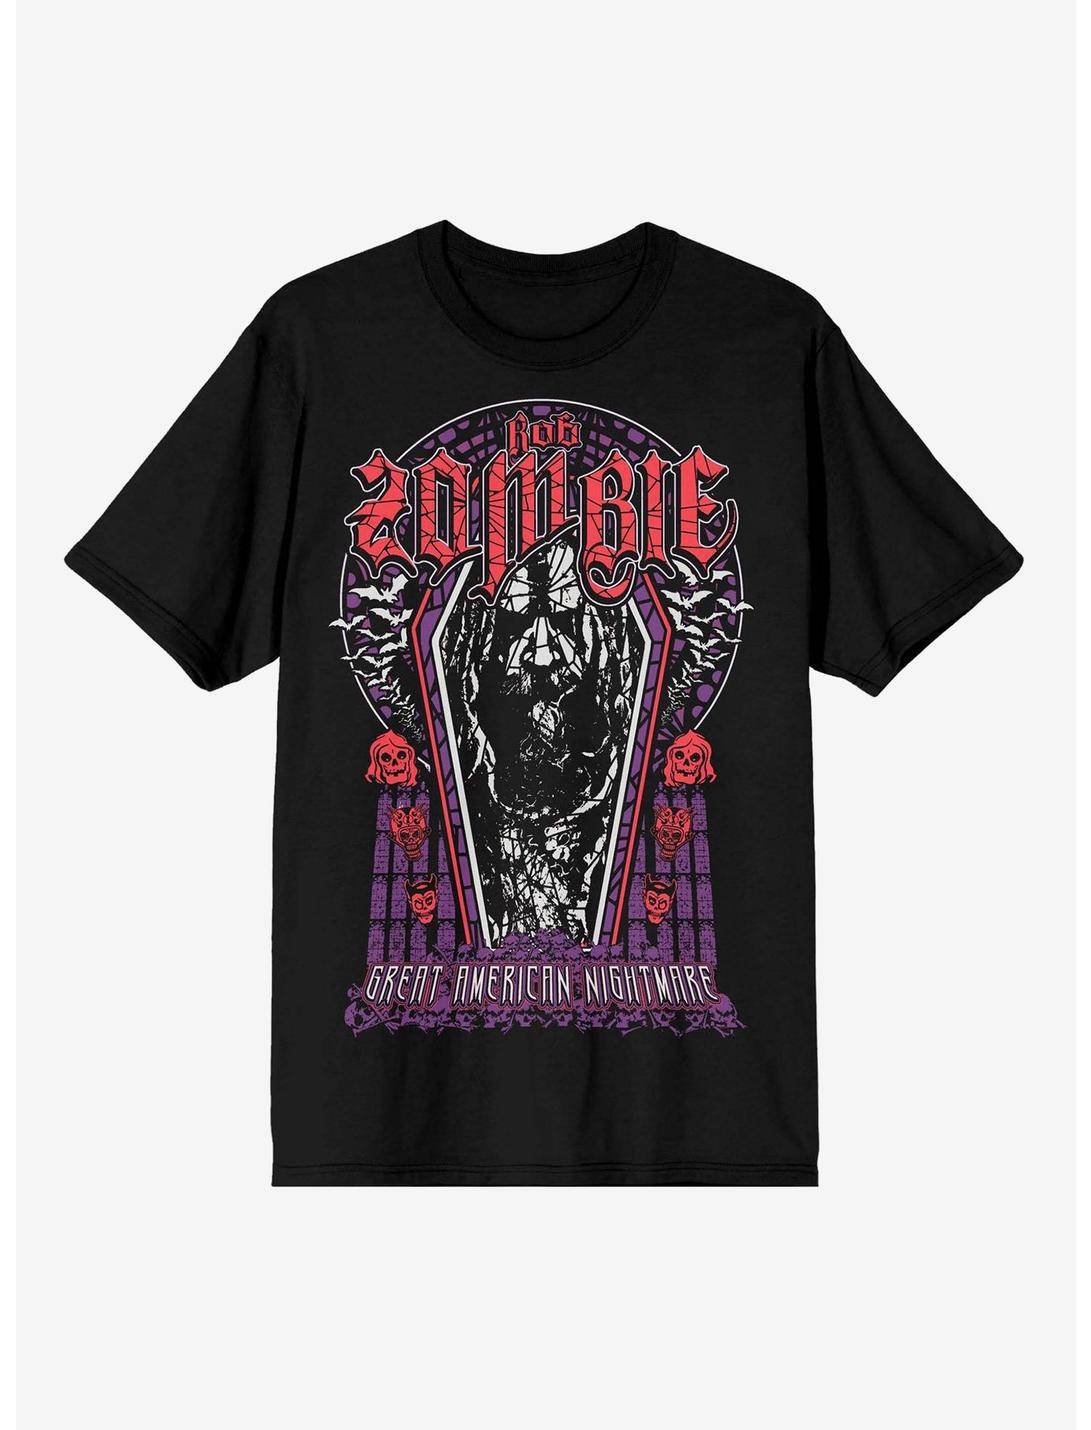 Rob Zombie Stained Glass Boyfriend Fit Girls T-Shirt, BLACK, hi-res